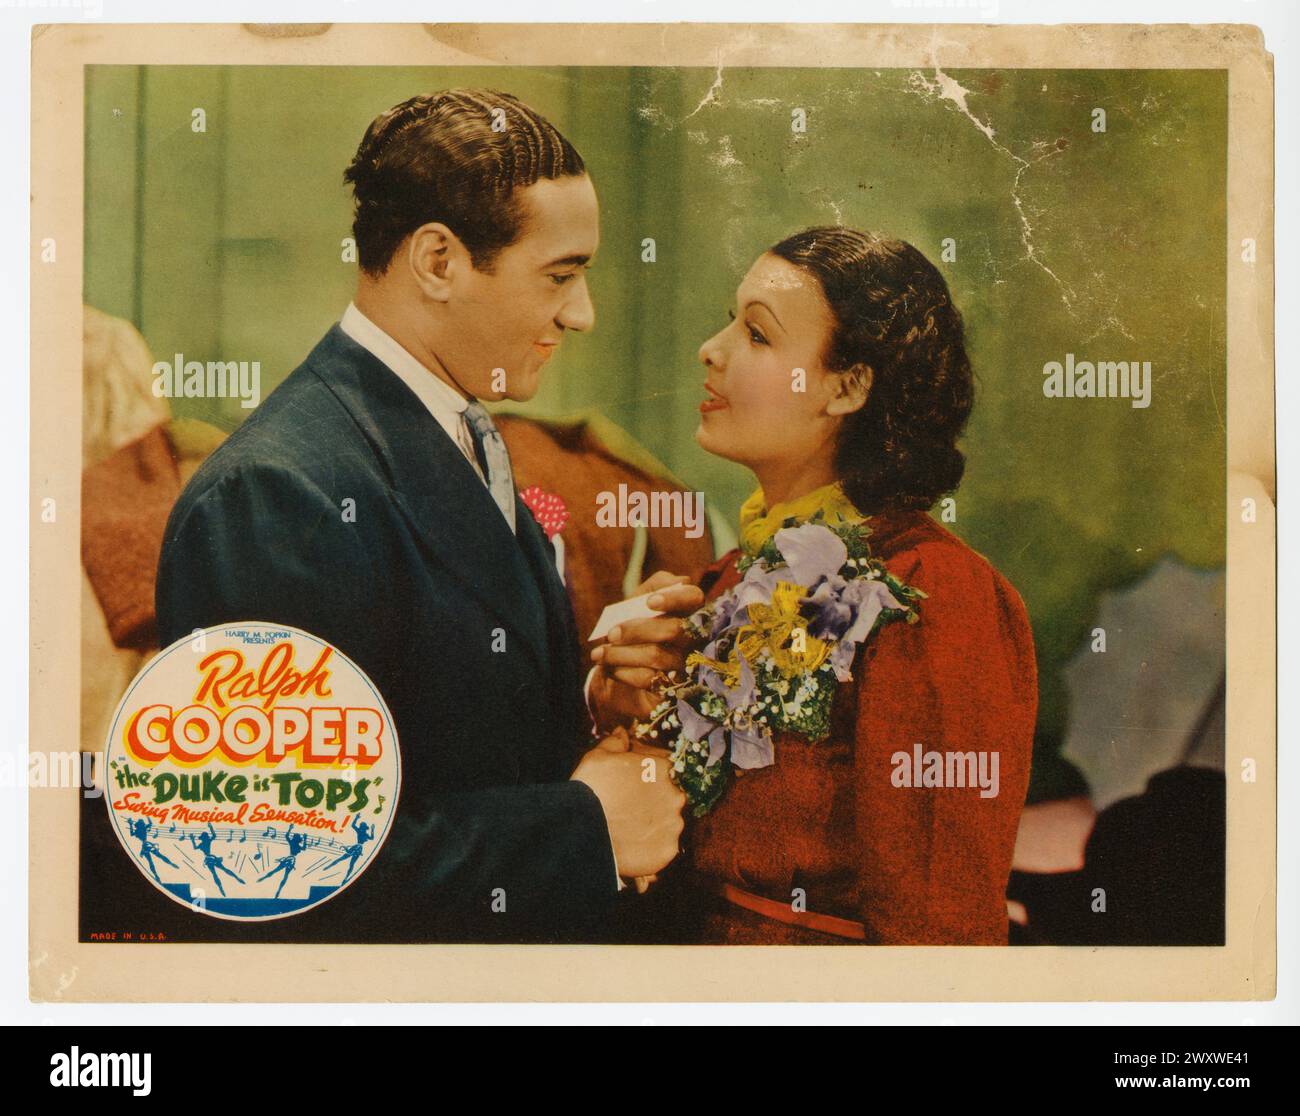 A lobby card for the movie The Duke is Tops directed by William Nolte. 1938. Stock Photo